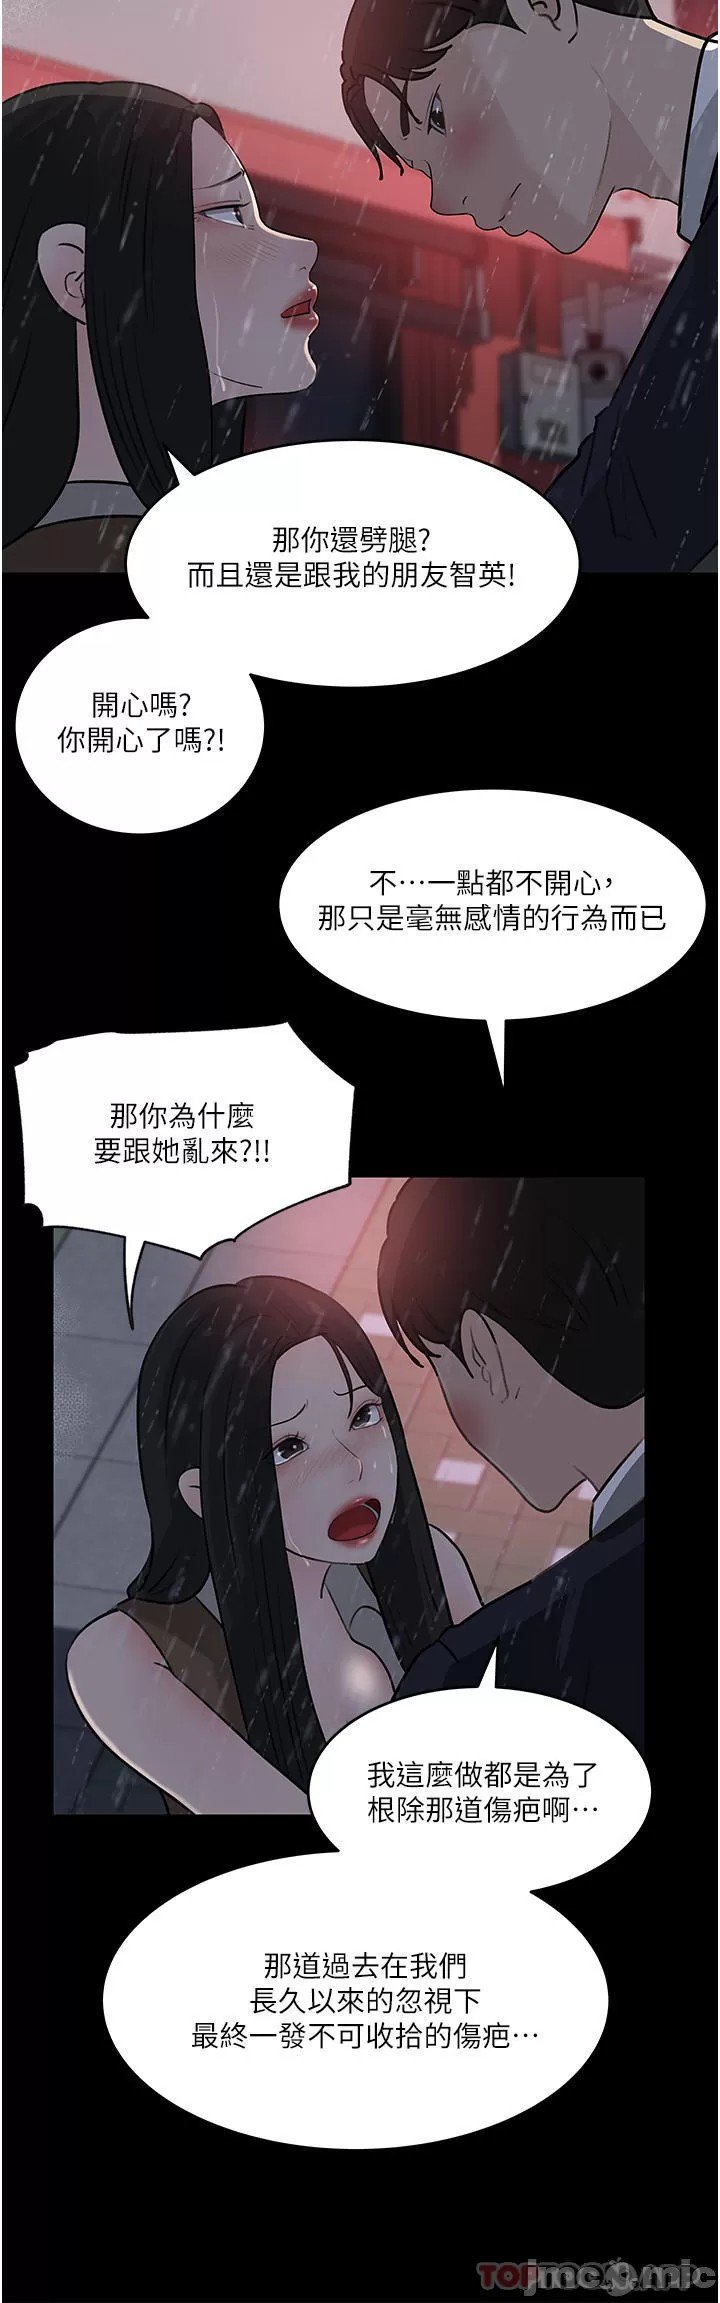 in-my-sister-in-law-raw-chap-45-45